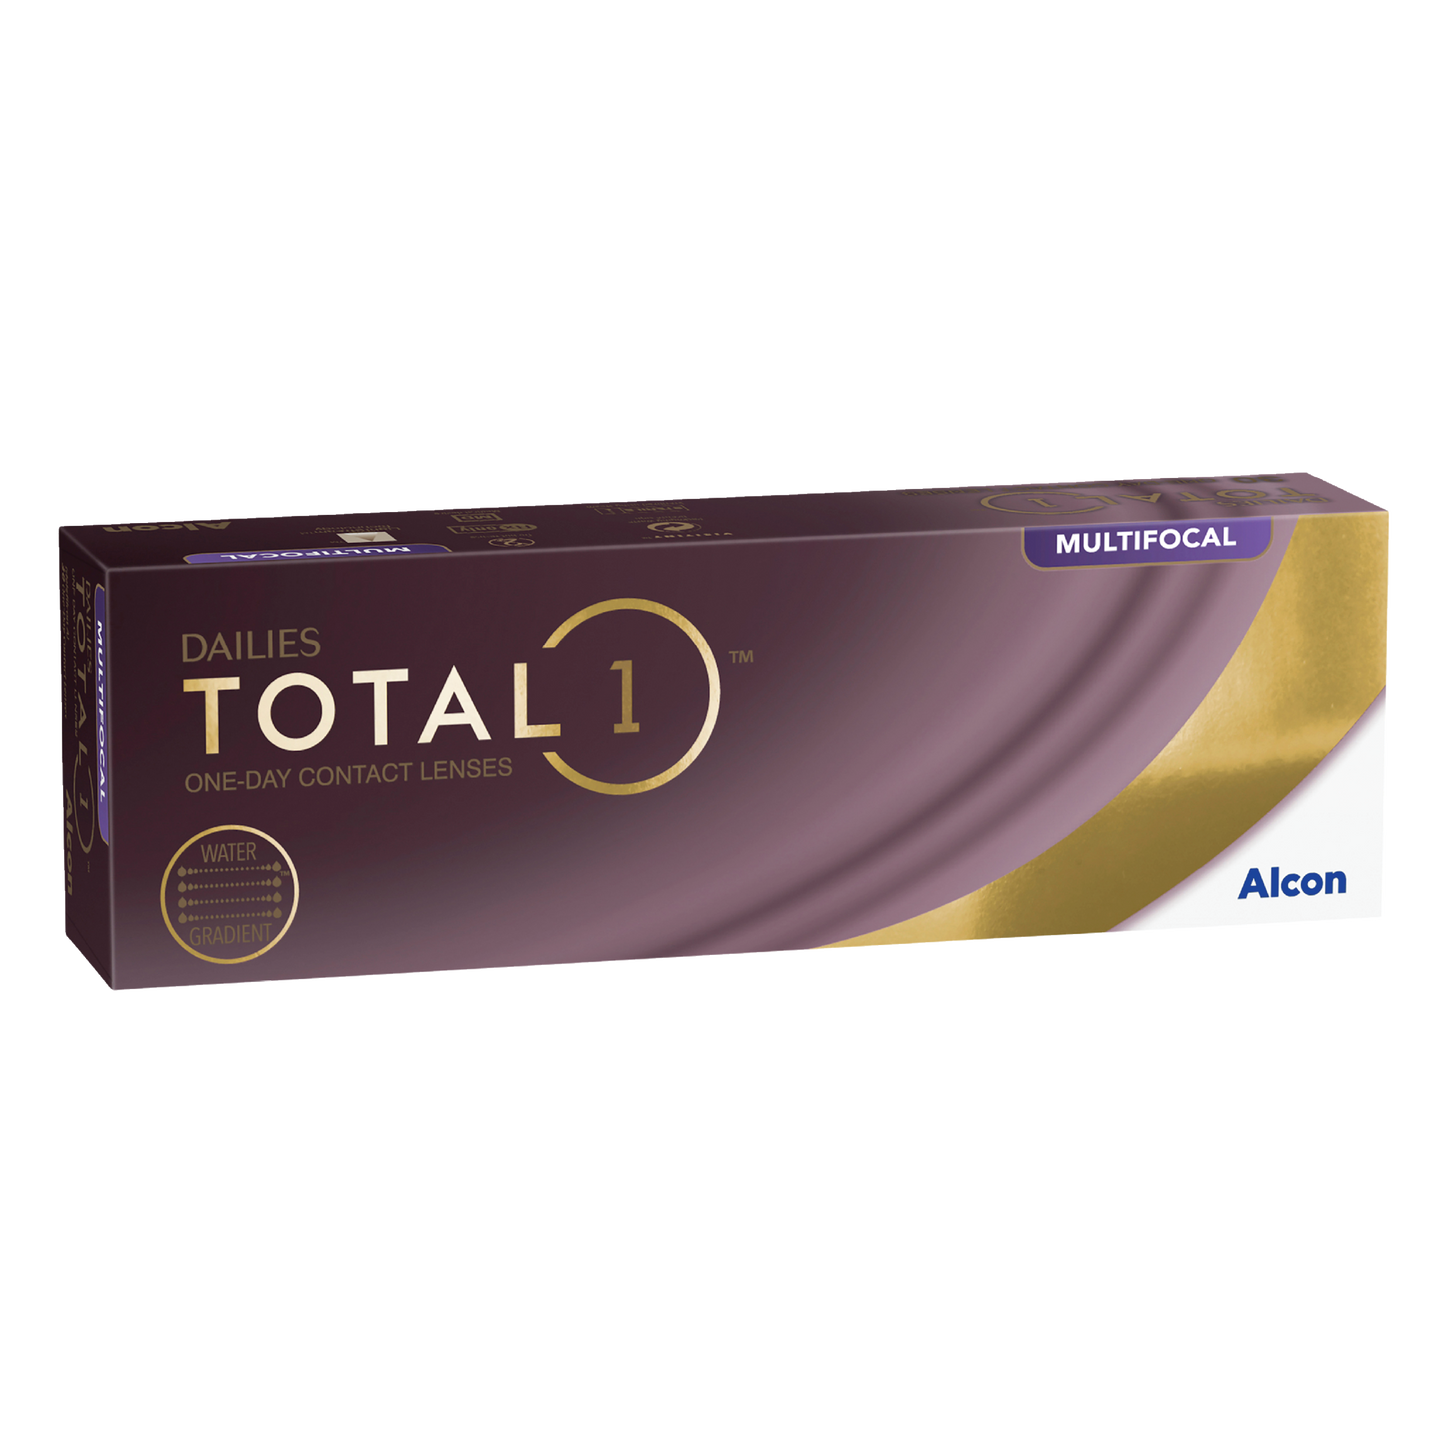 Box of Alcon Dailies Total1 multifocal contact lenses